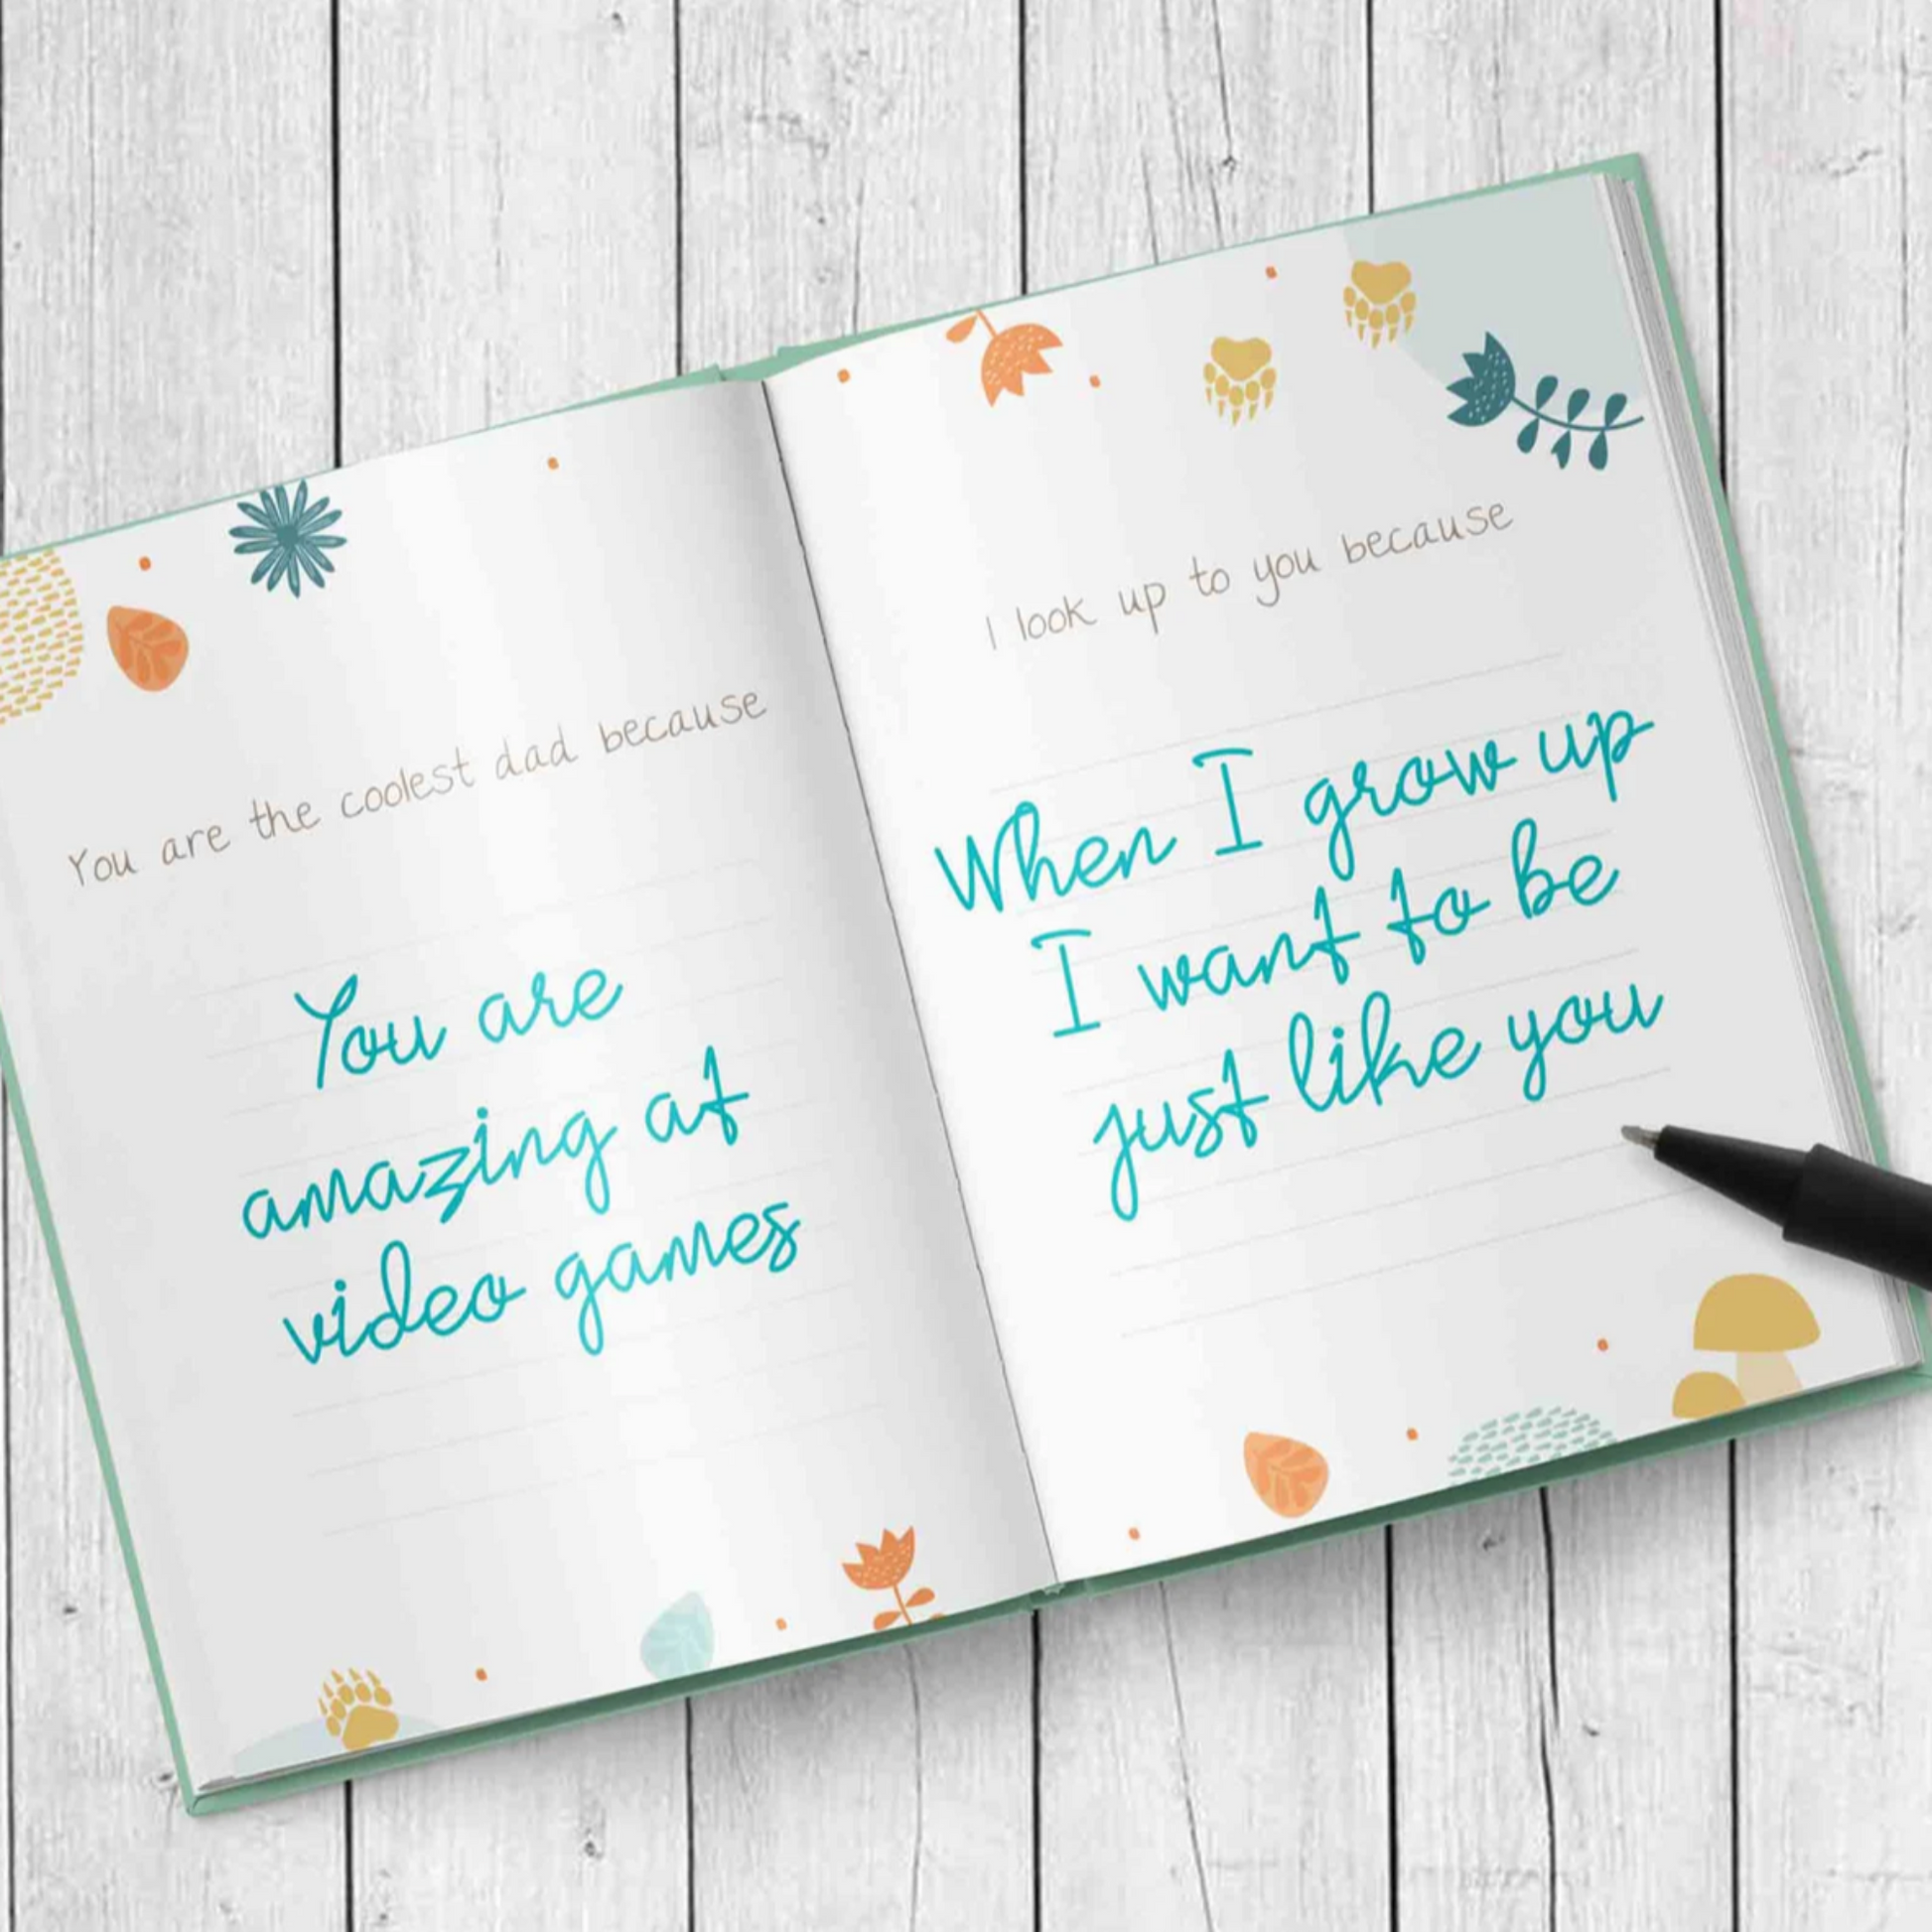 Custom gift for dad from kids. Fill in the blank book with prompts. Gifts for dad from kids. Luhvee Books.